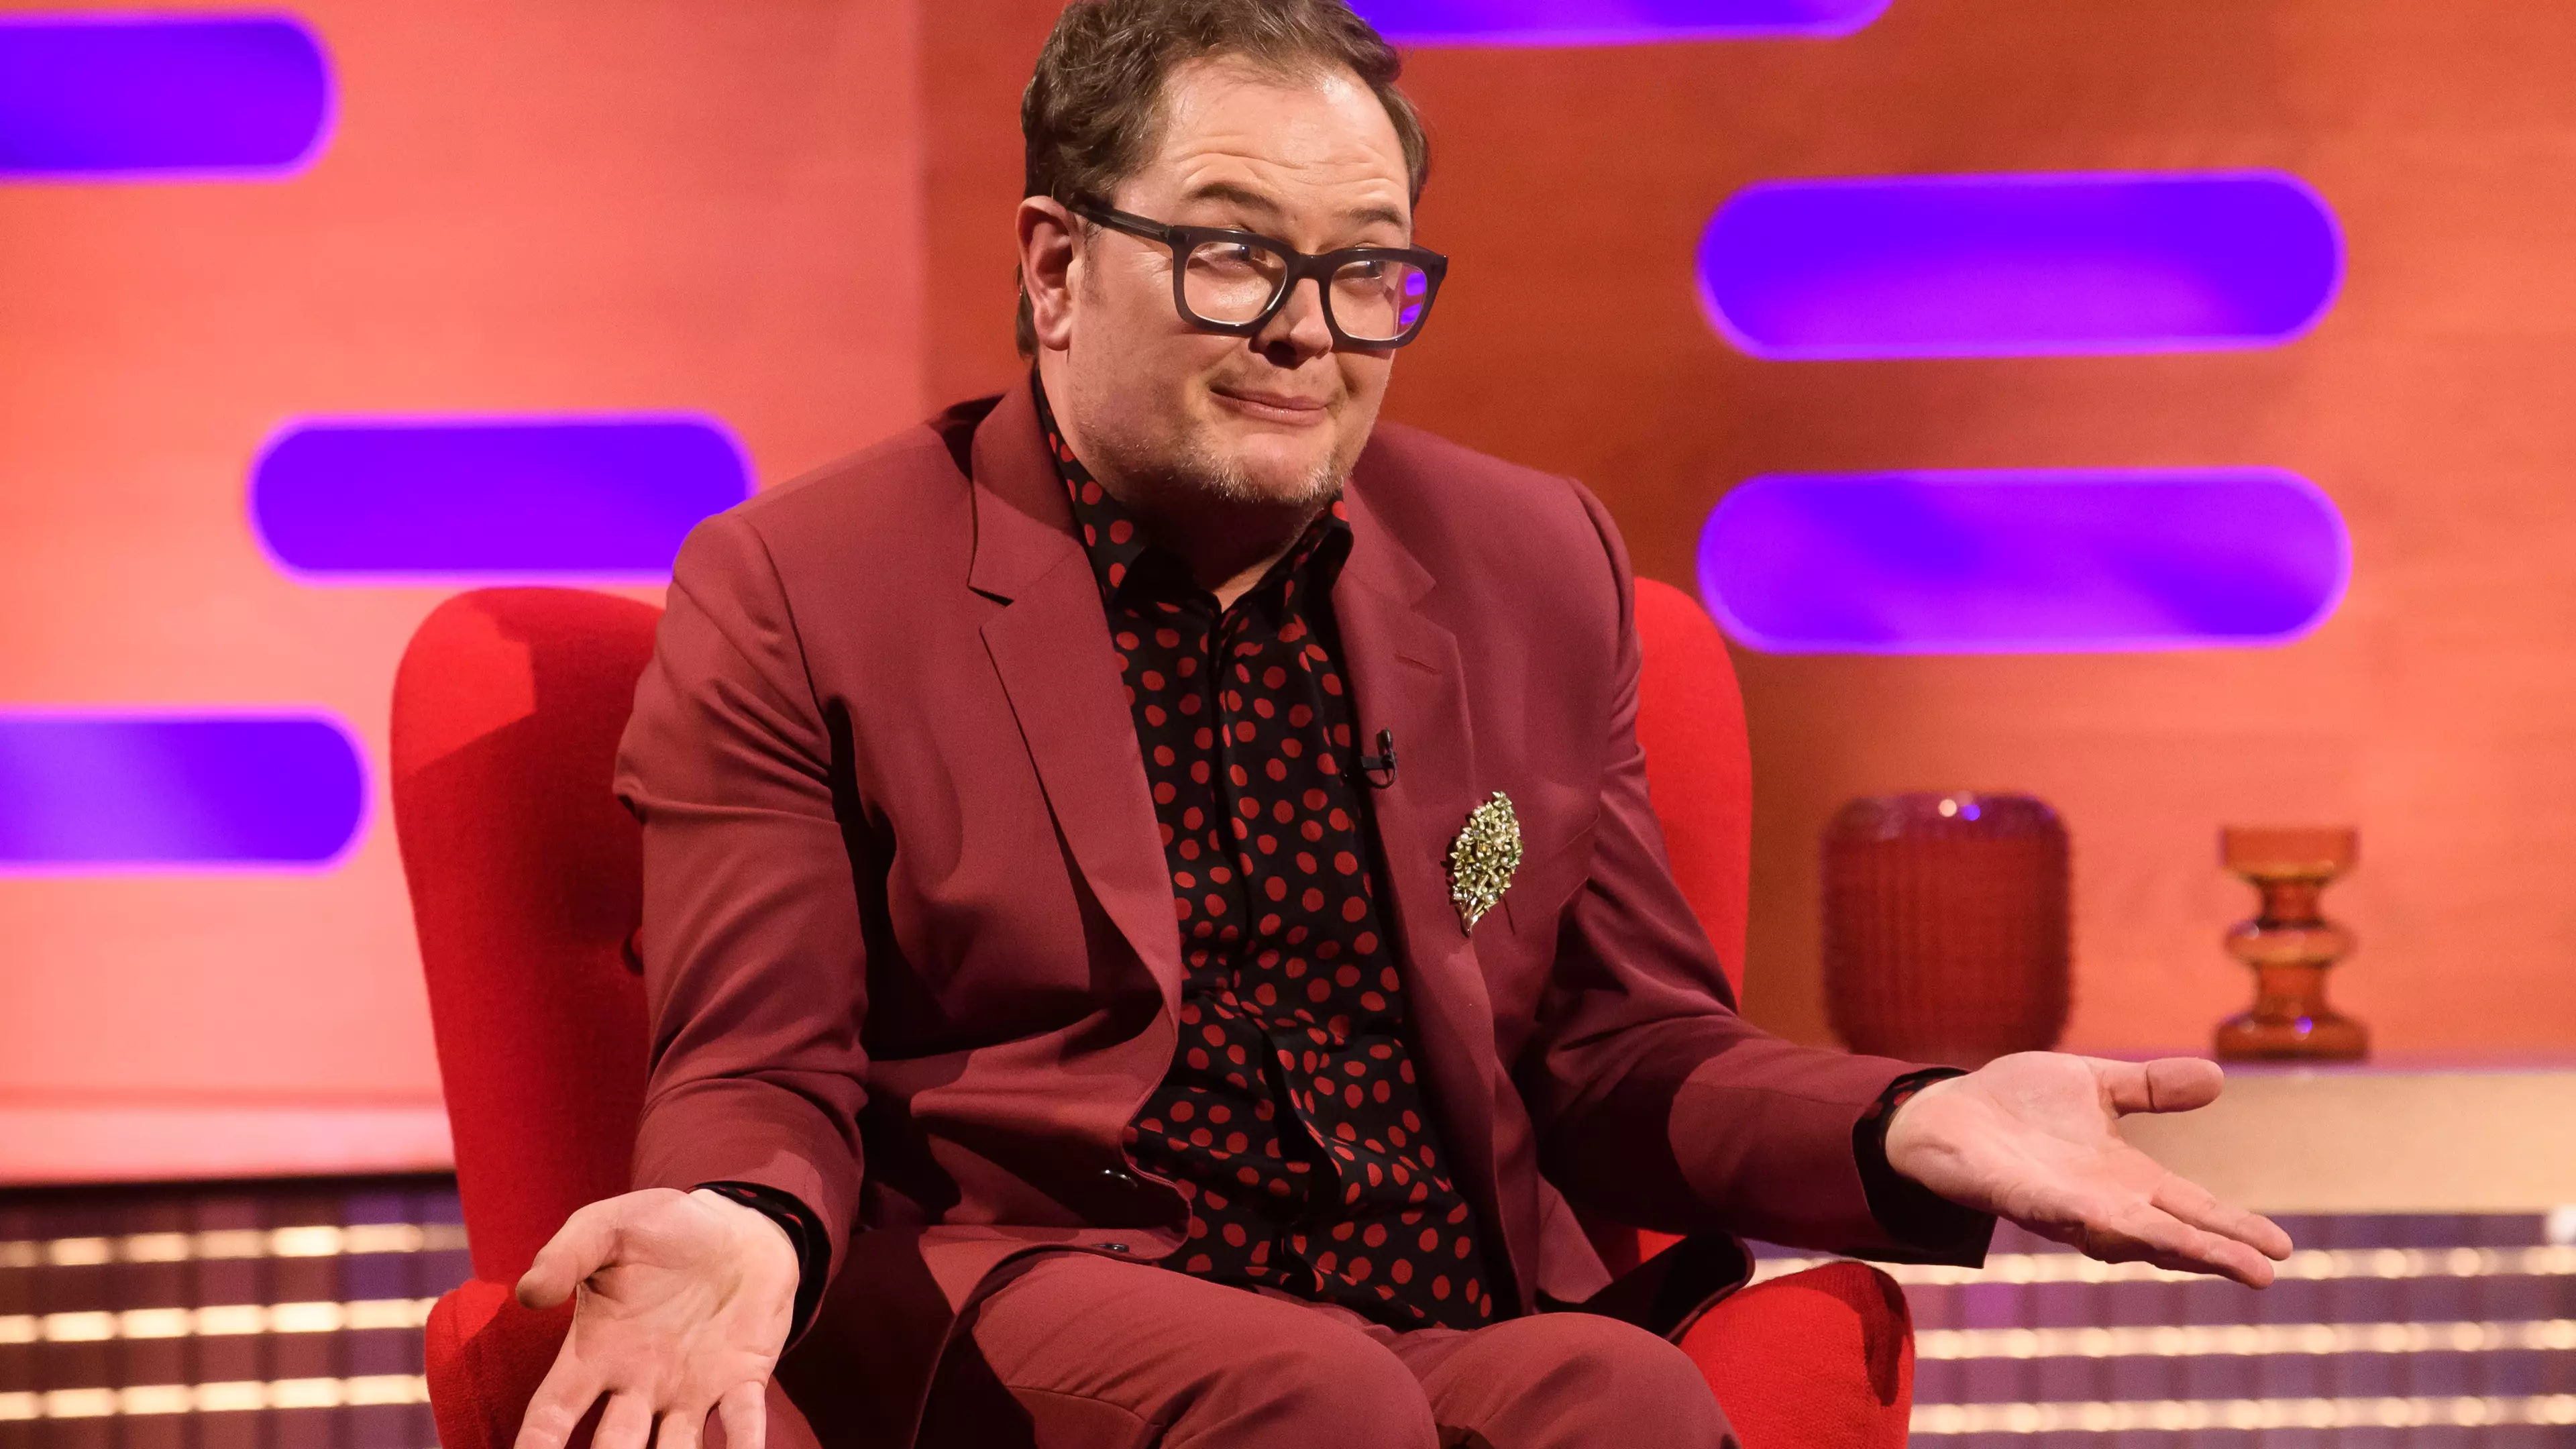 Alan Carr's Comments On Epic Gameshow About Meghan Markle Divide Viewers